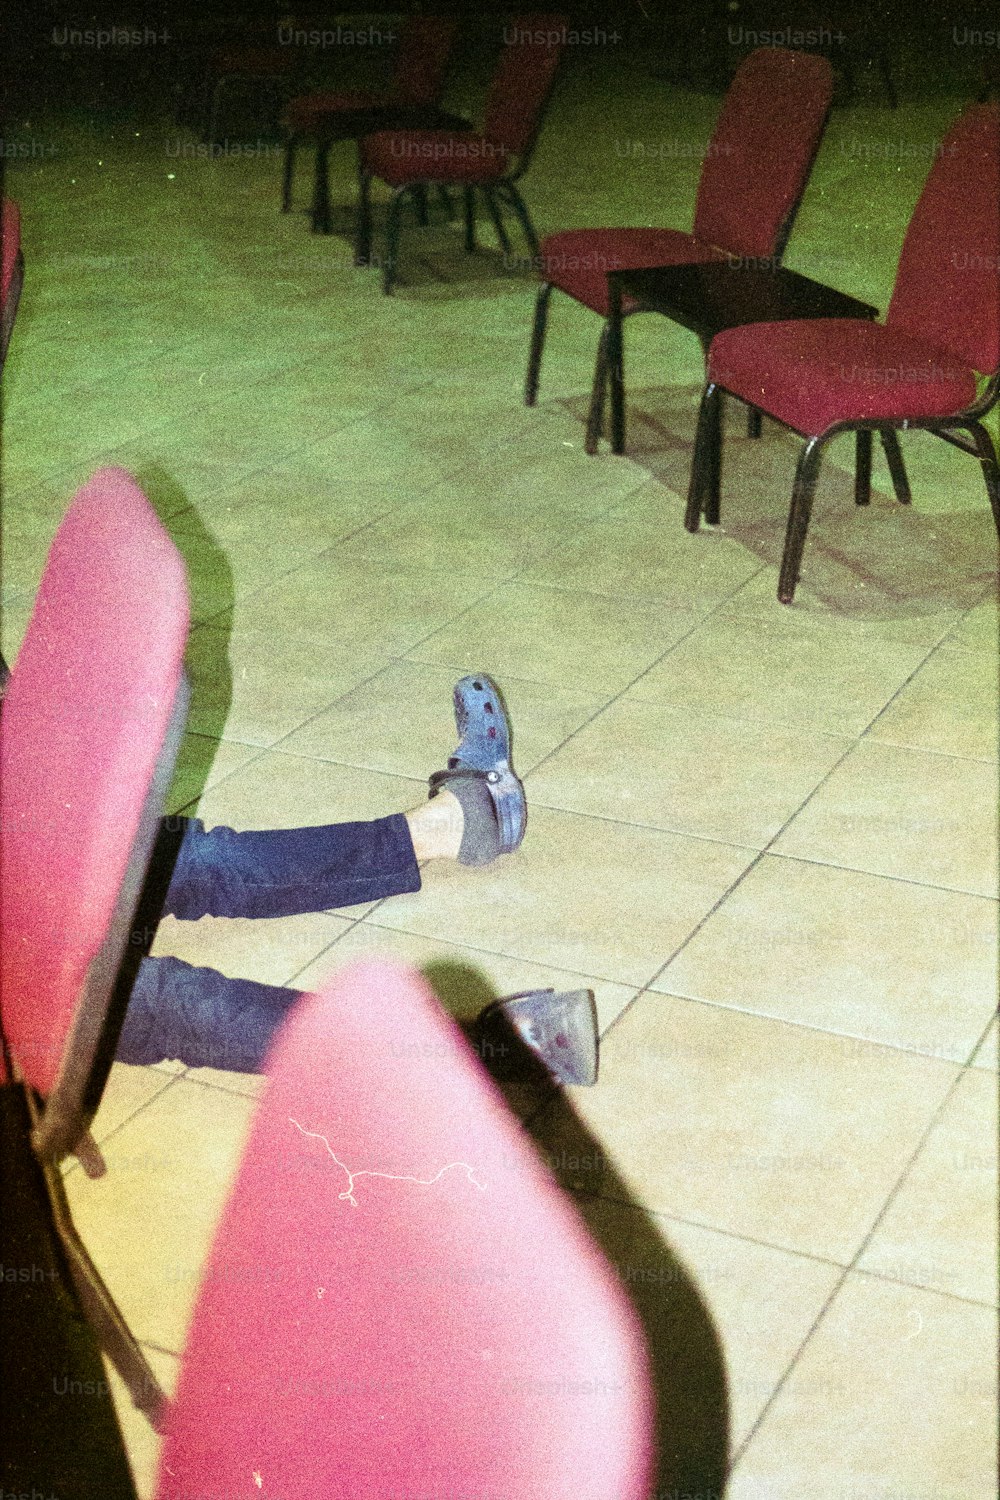 a person laying on the ground with their feet on a chair